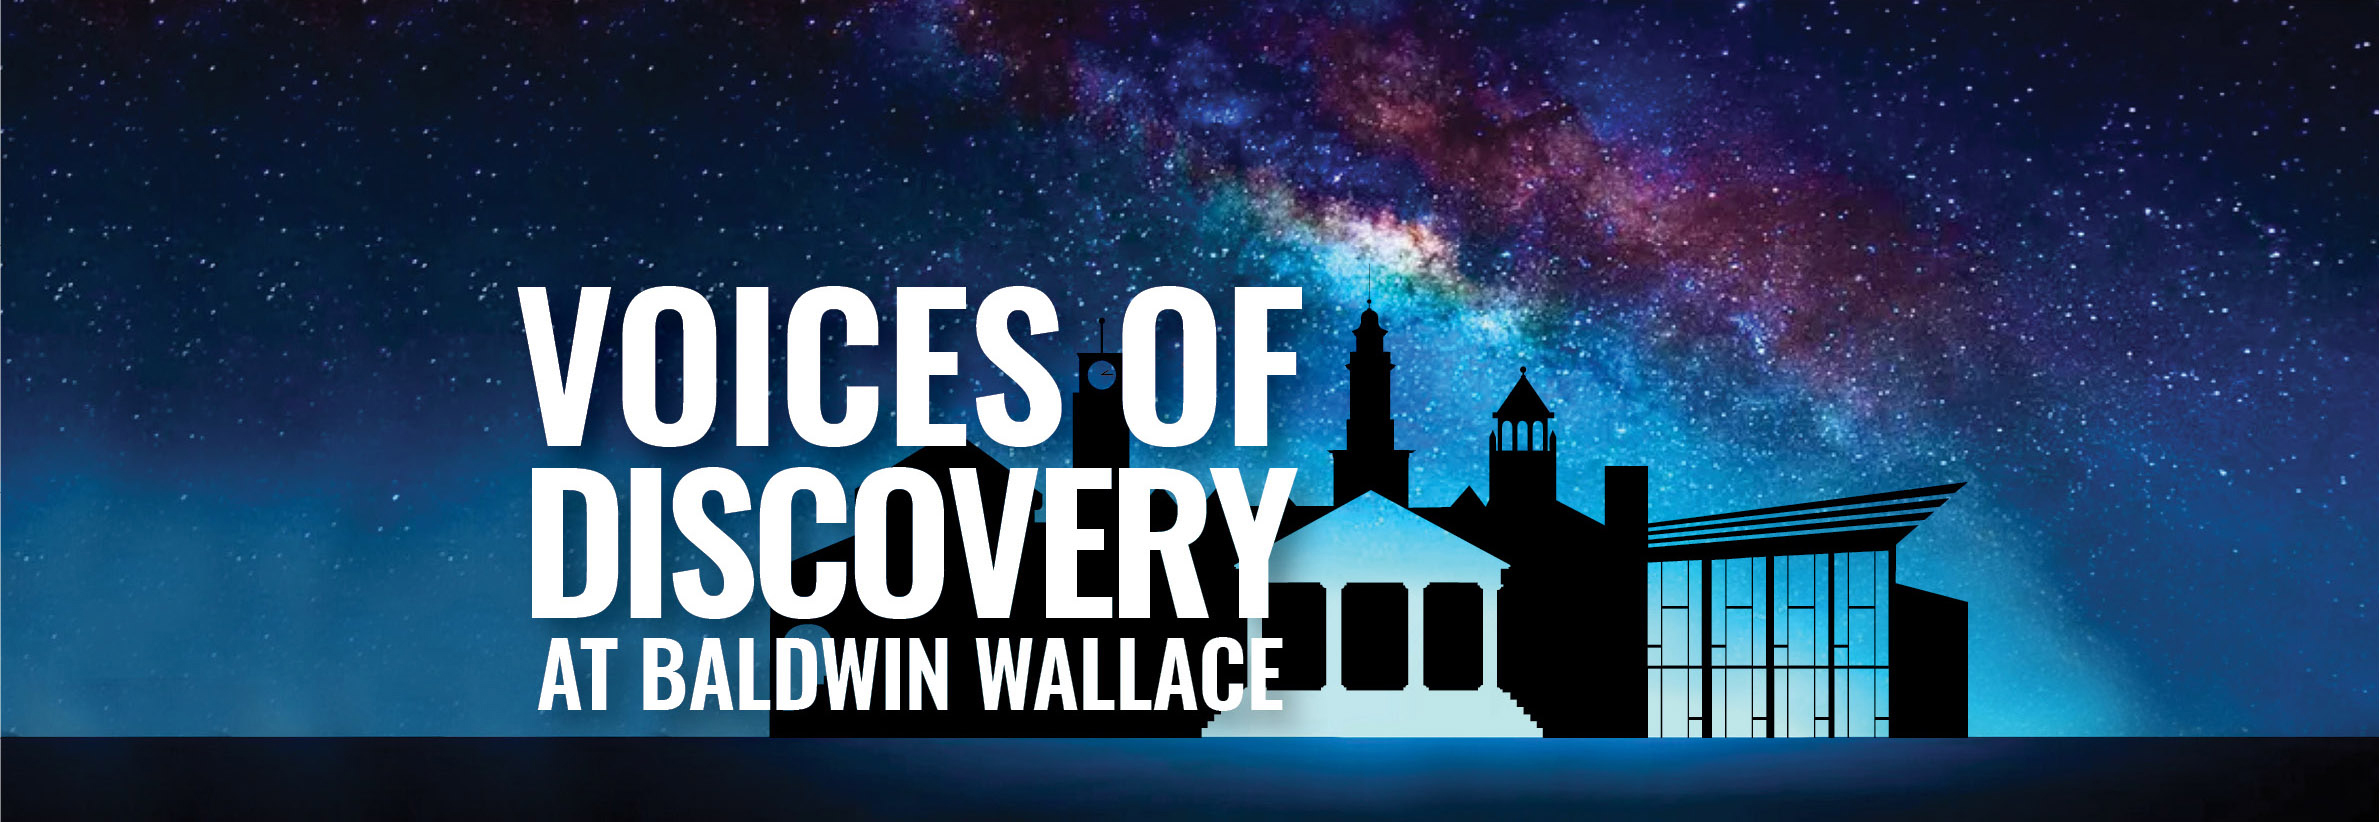 Voices of Discovery banner